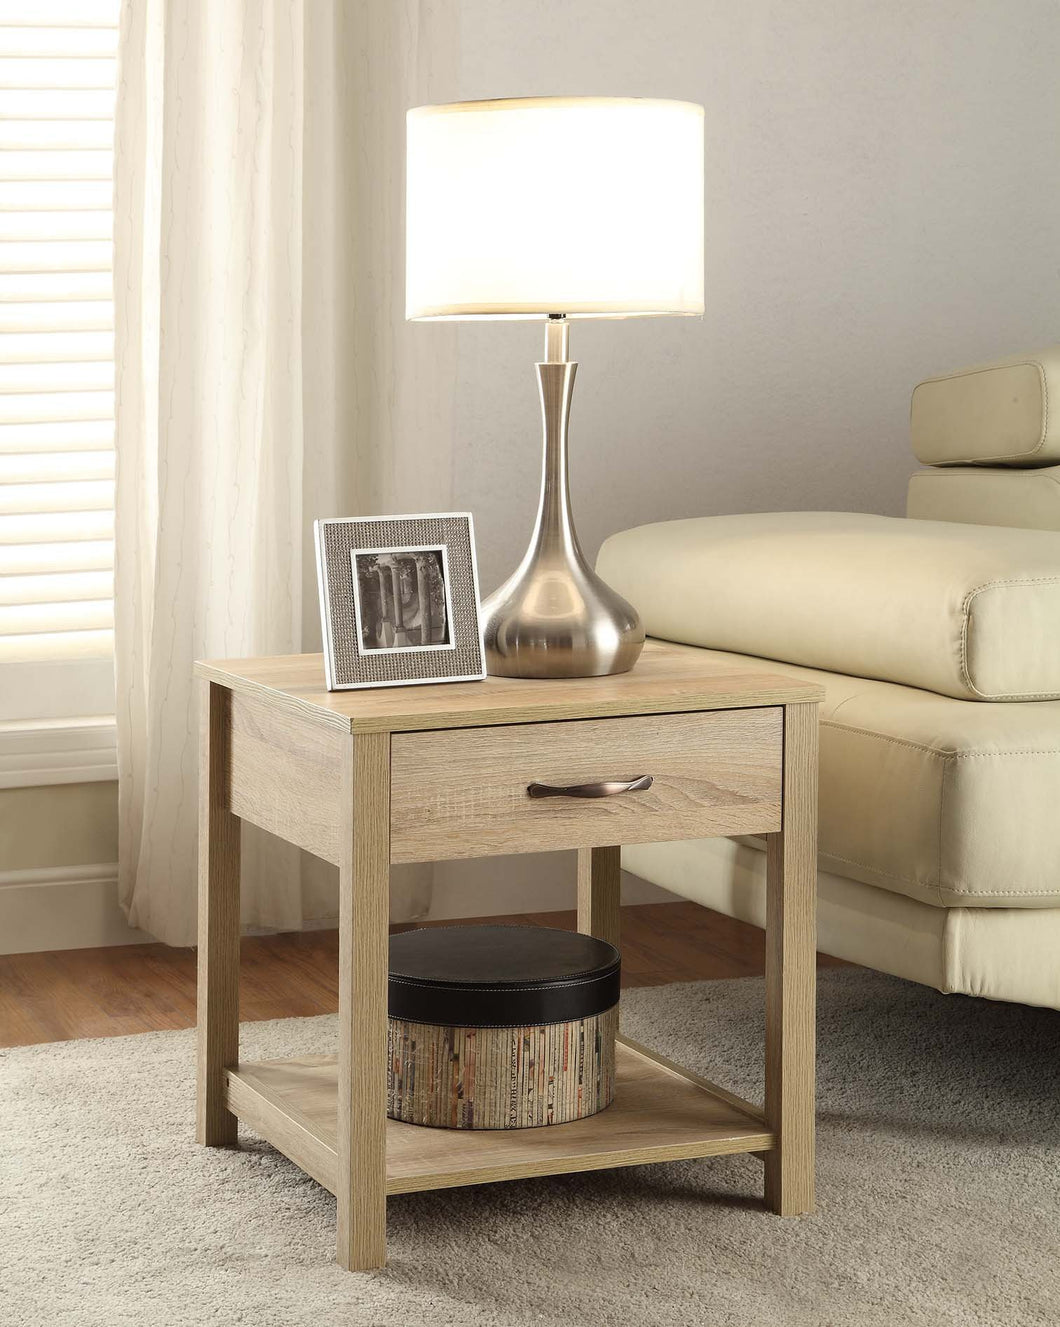 Aspen End Table in Blonde Finish